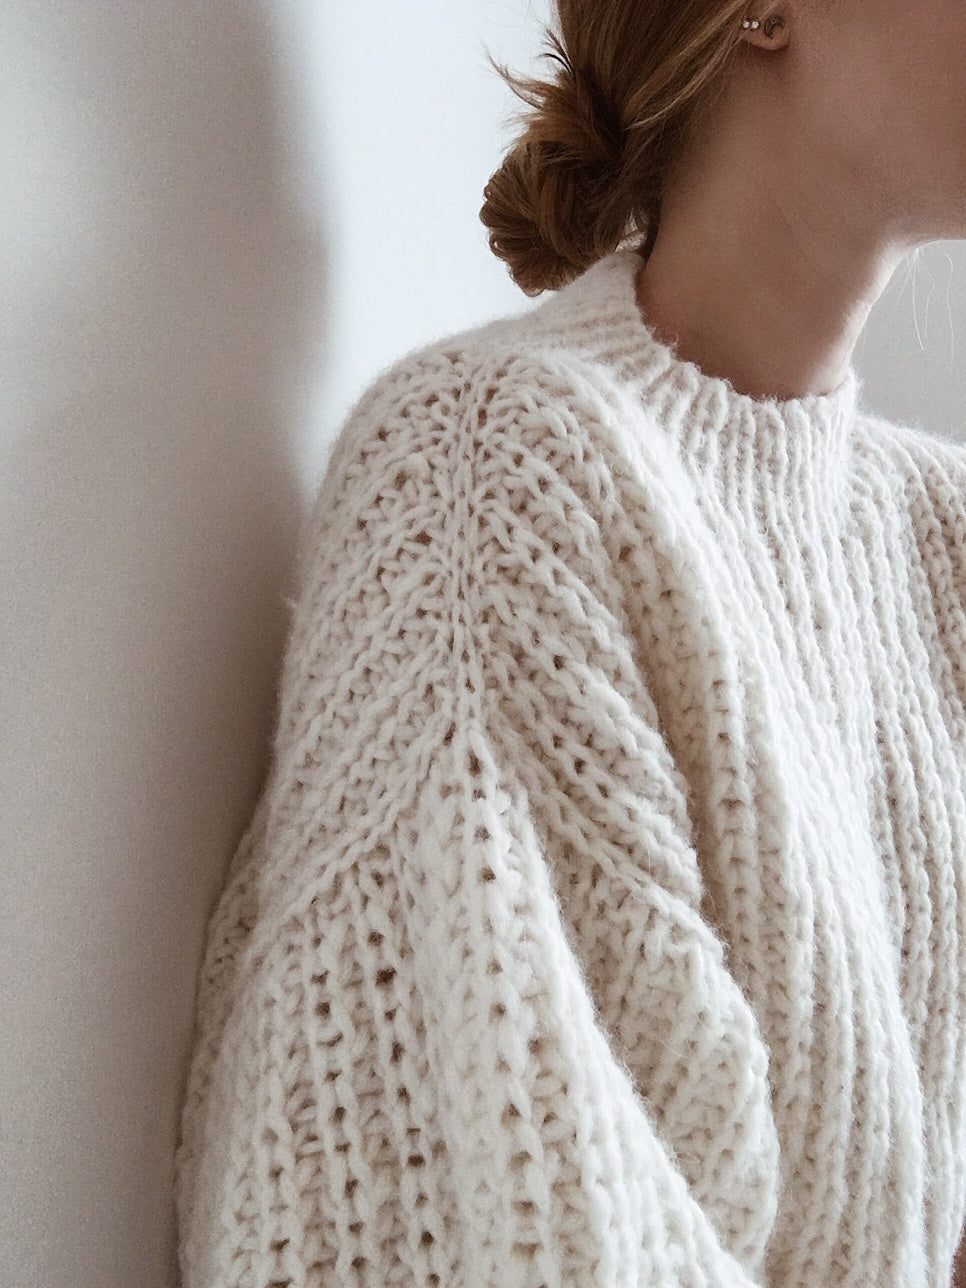 Sweater No. 5 - NORSK